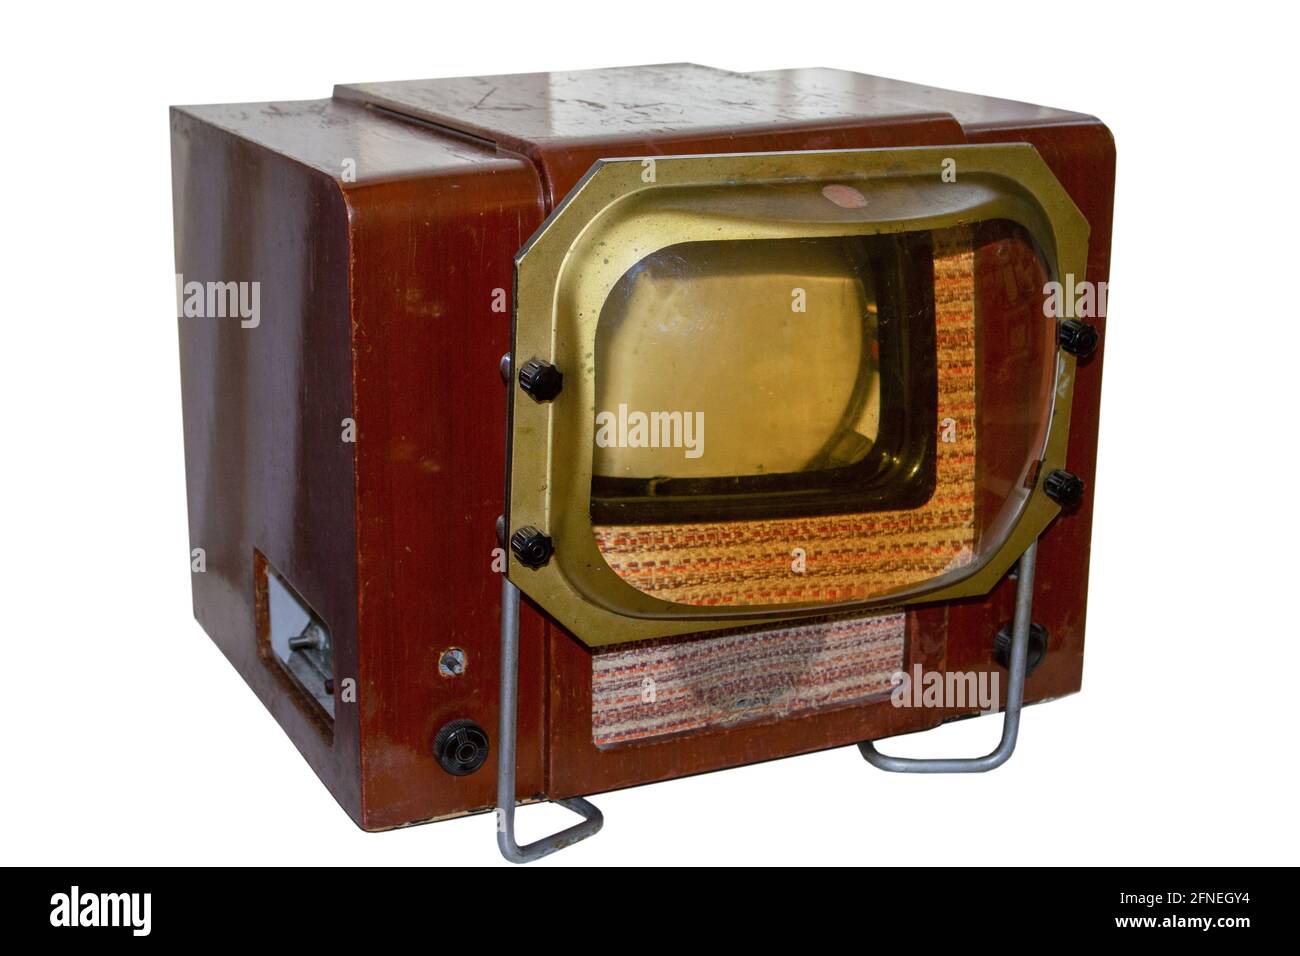 Old TV isolated on a white background. Wooden body and attachment lens for image enlargement. Stock Photo